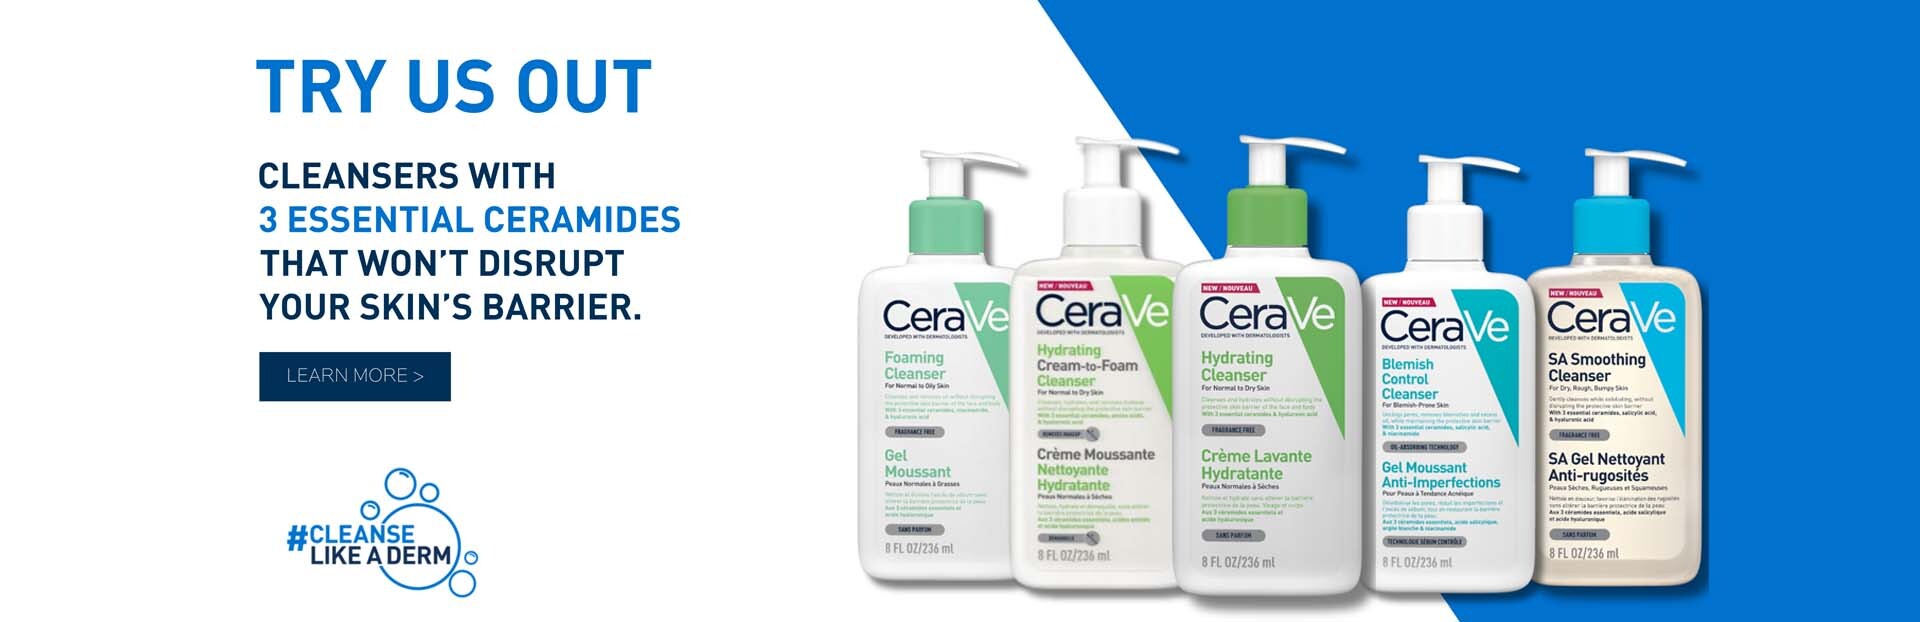 27_1920_Cerave_Cleansers.jpg